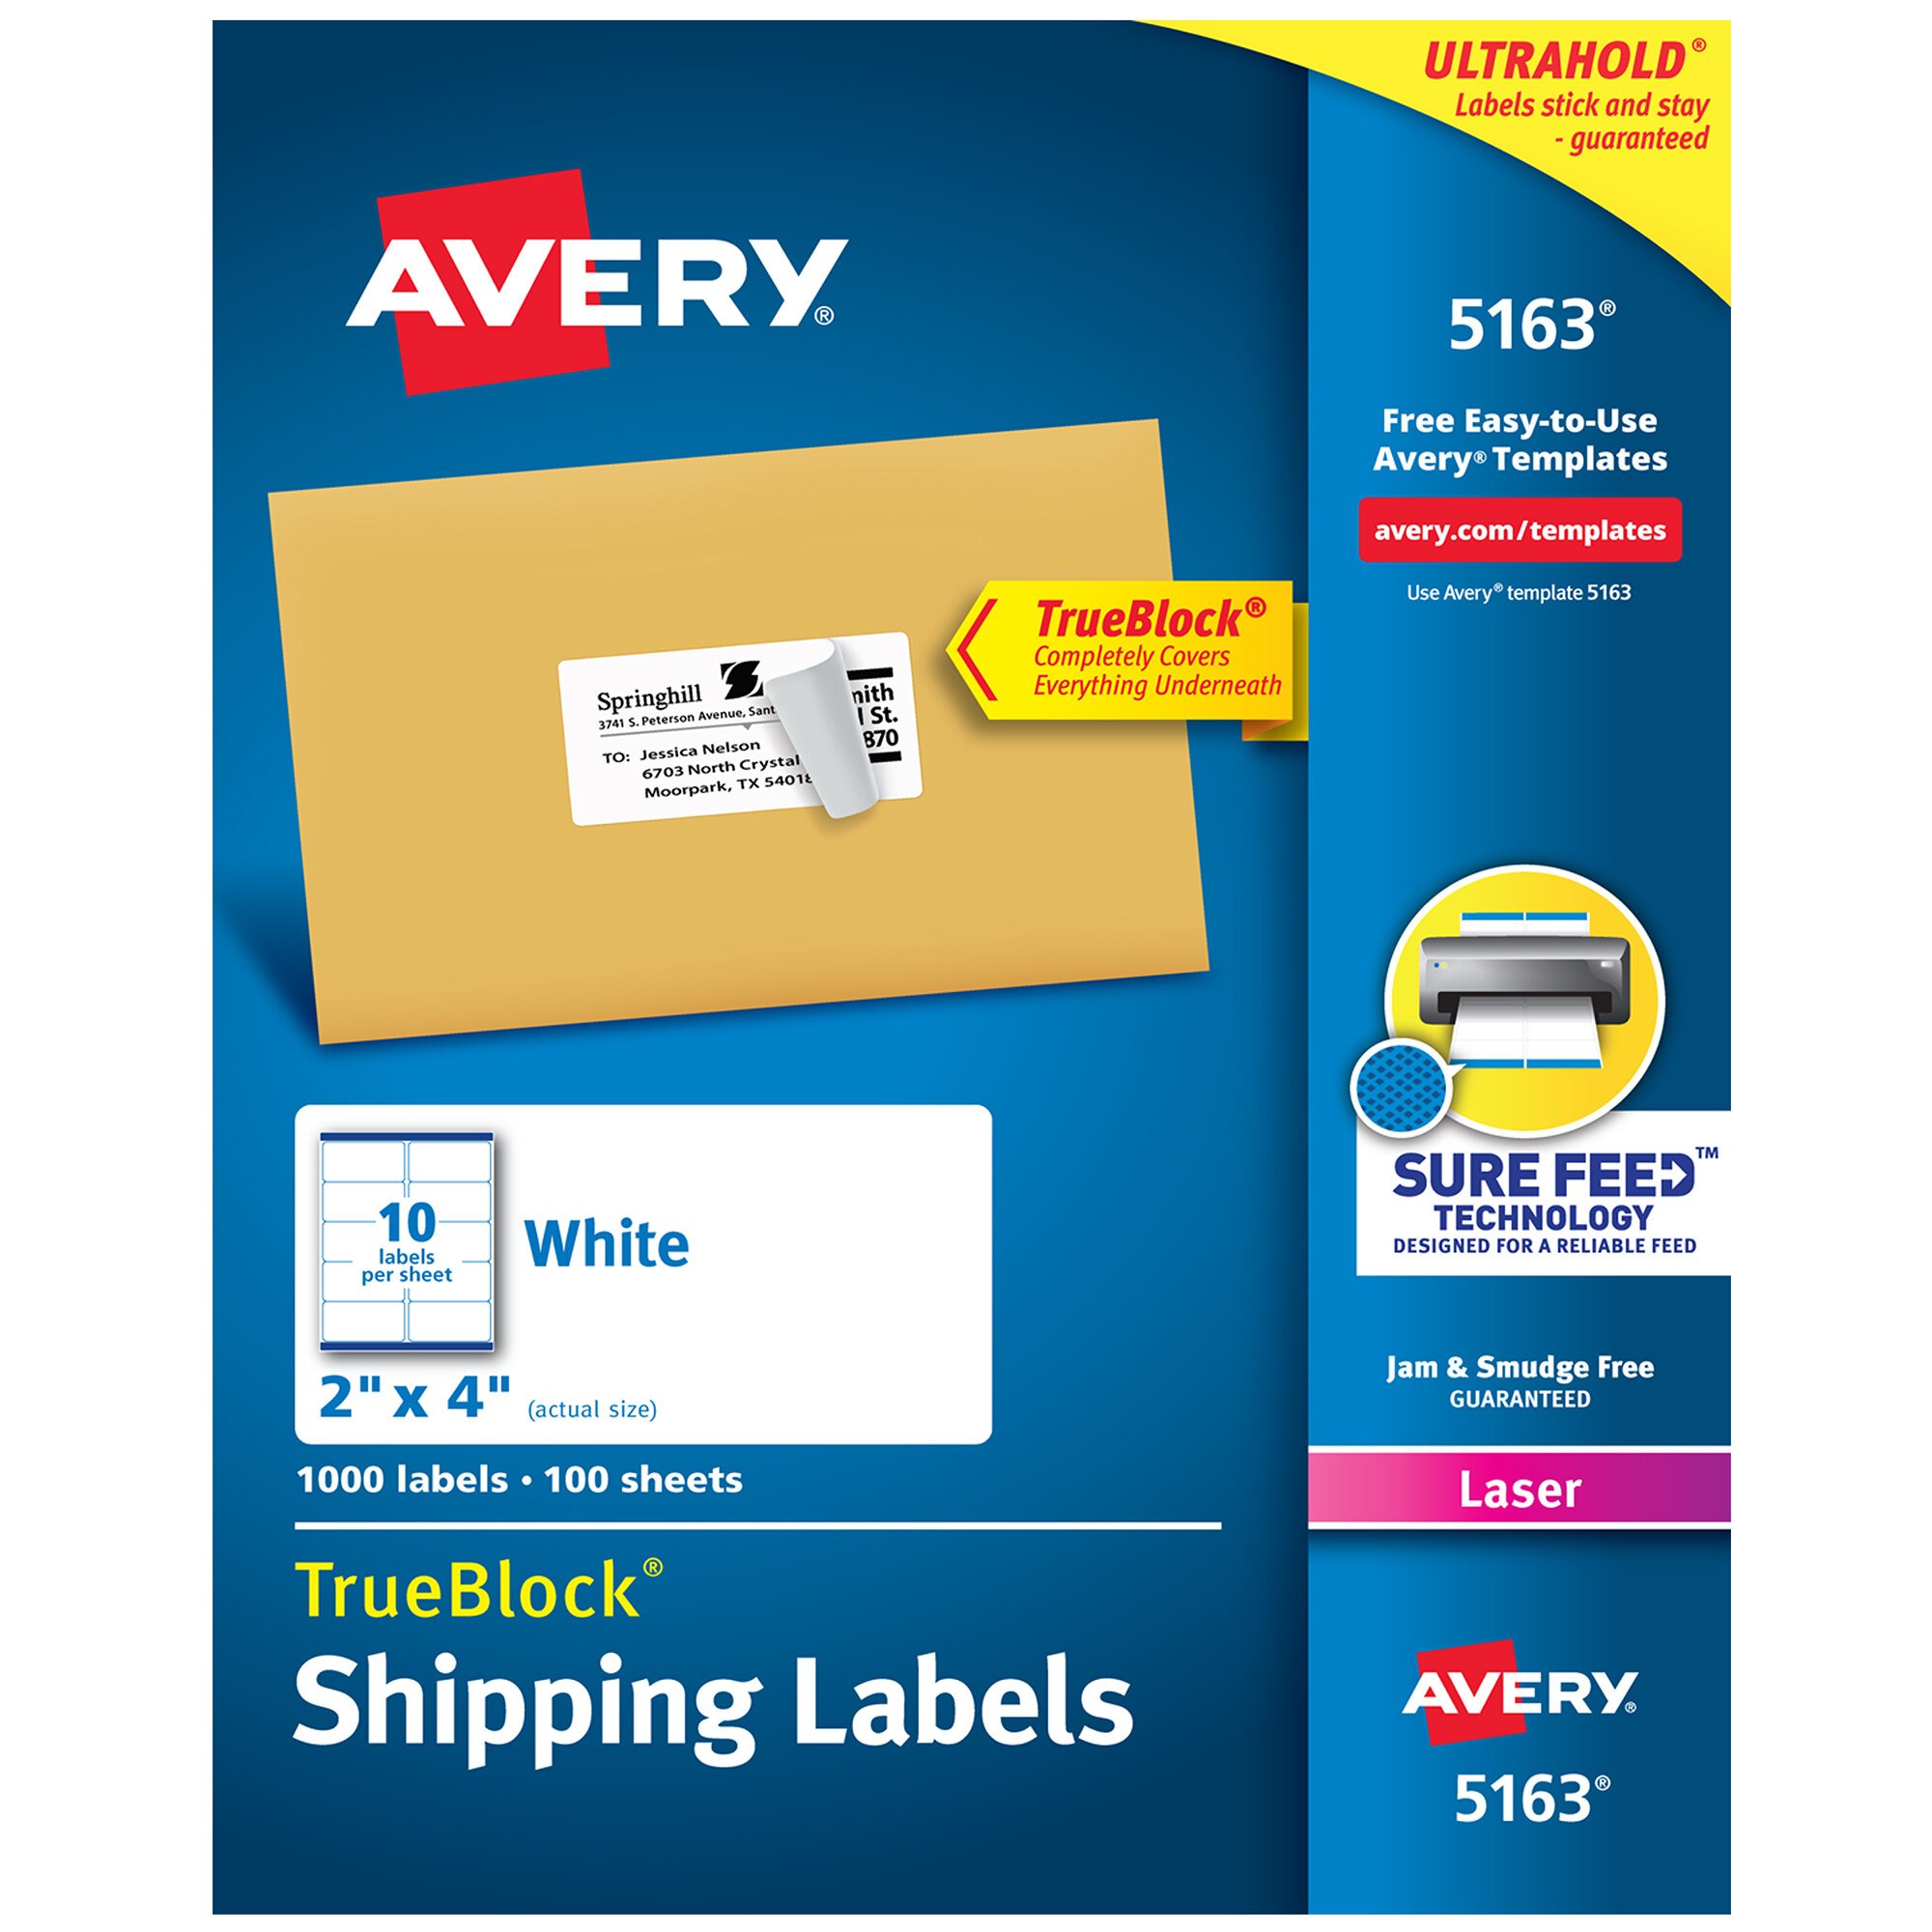 avery-label-template-5163